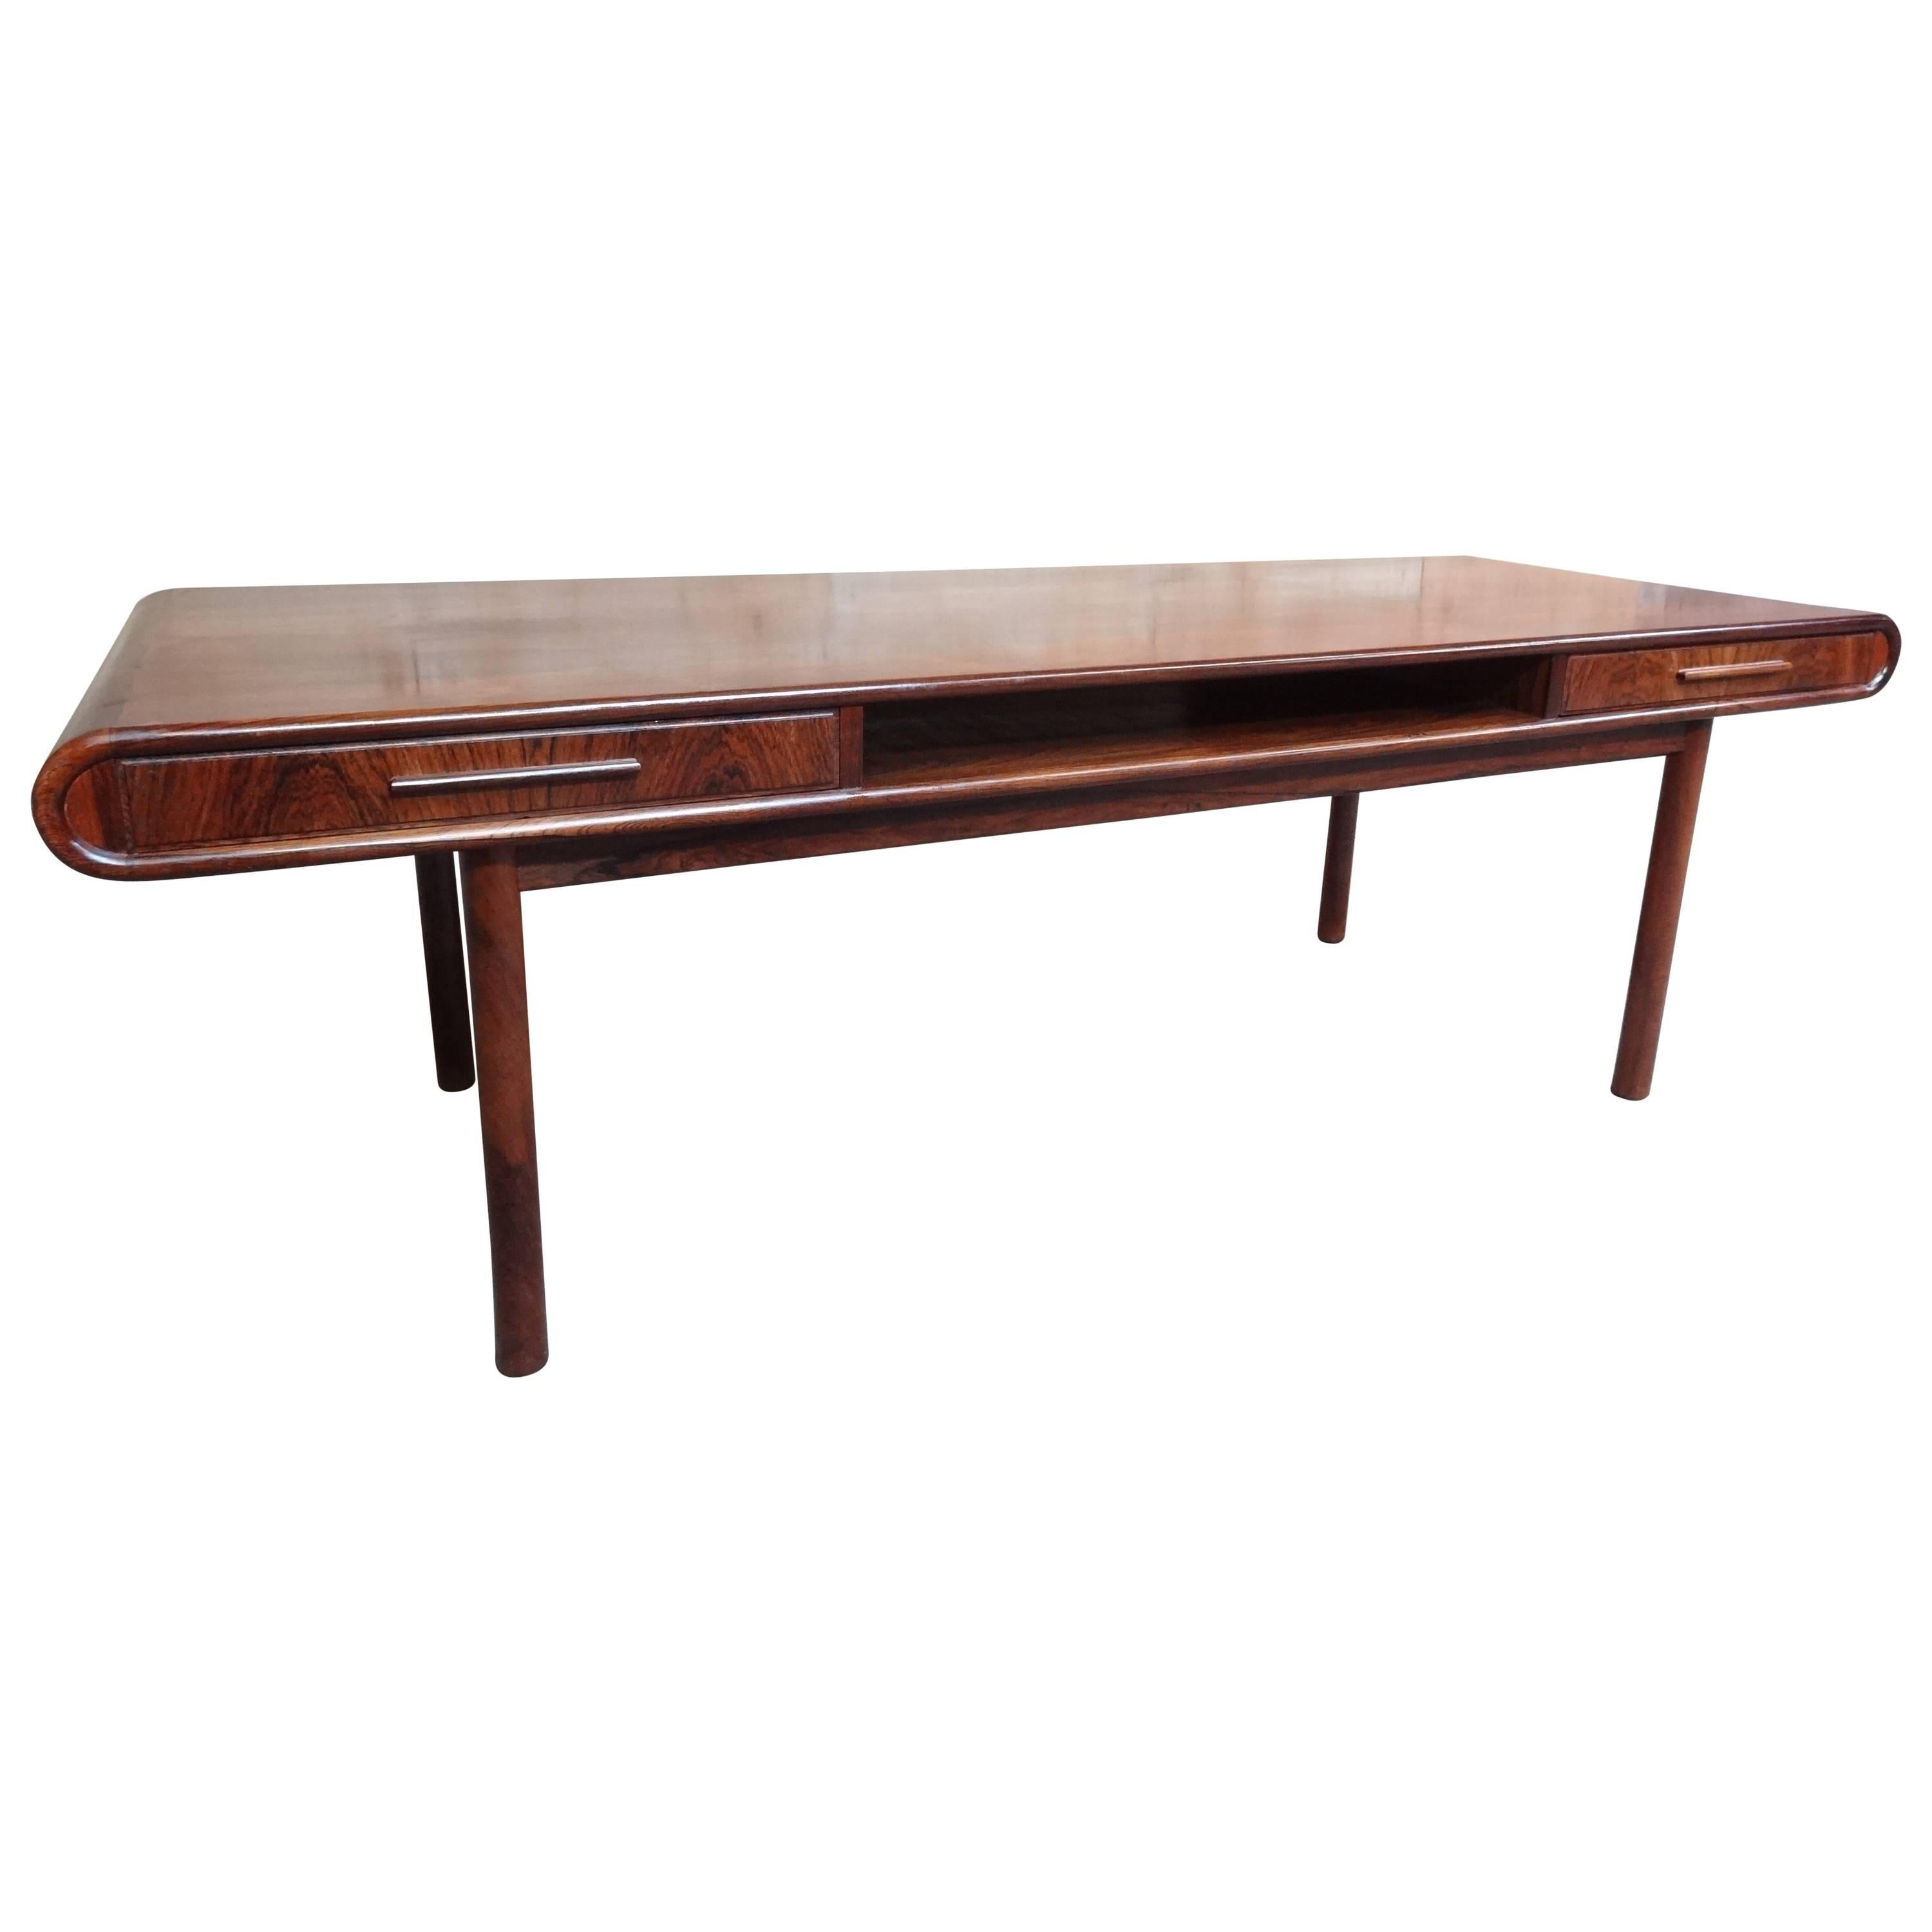 Exquisite Danish 1960s Retro Rosewood Coffee Table with Two Drawers